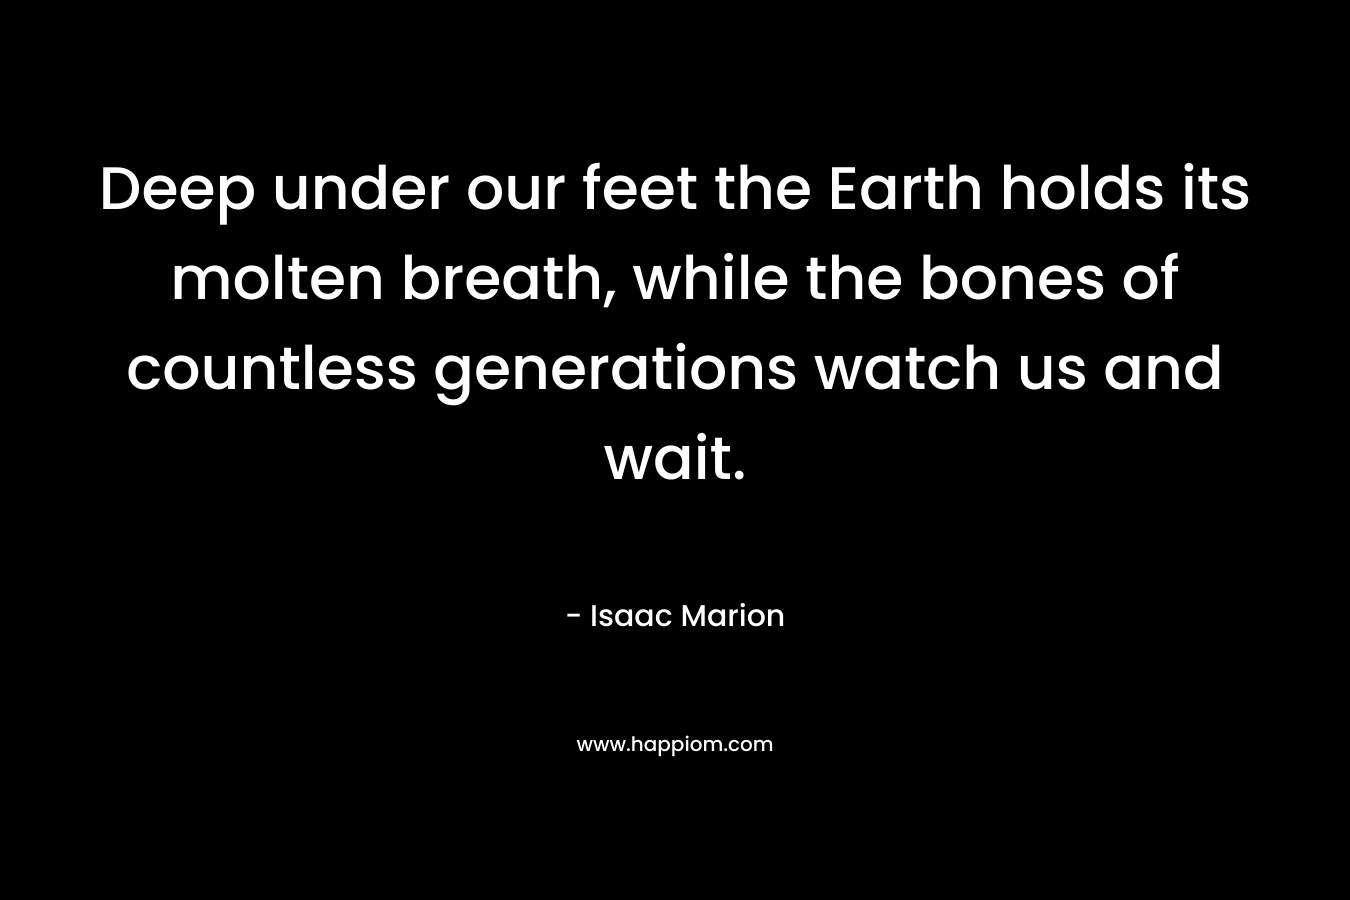 Deep under our feet the Earth holds its molten breath, while the bones of countless generations watch us and wait. – Isaac Marion